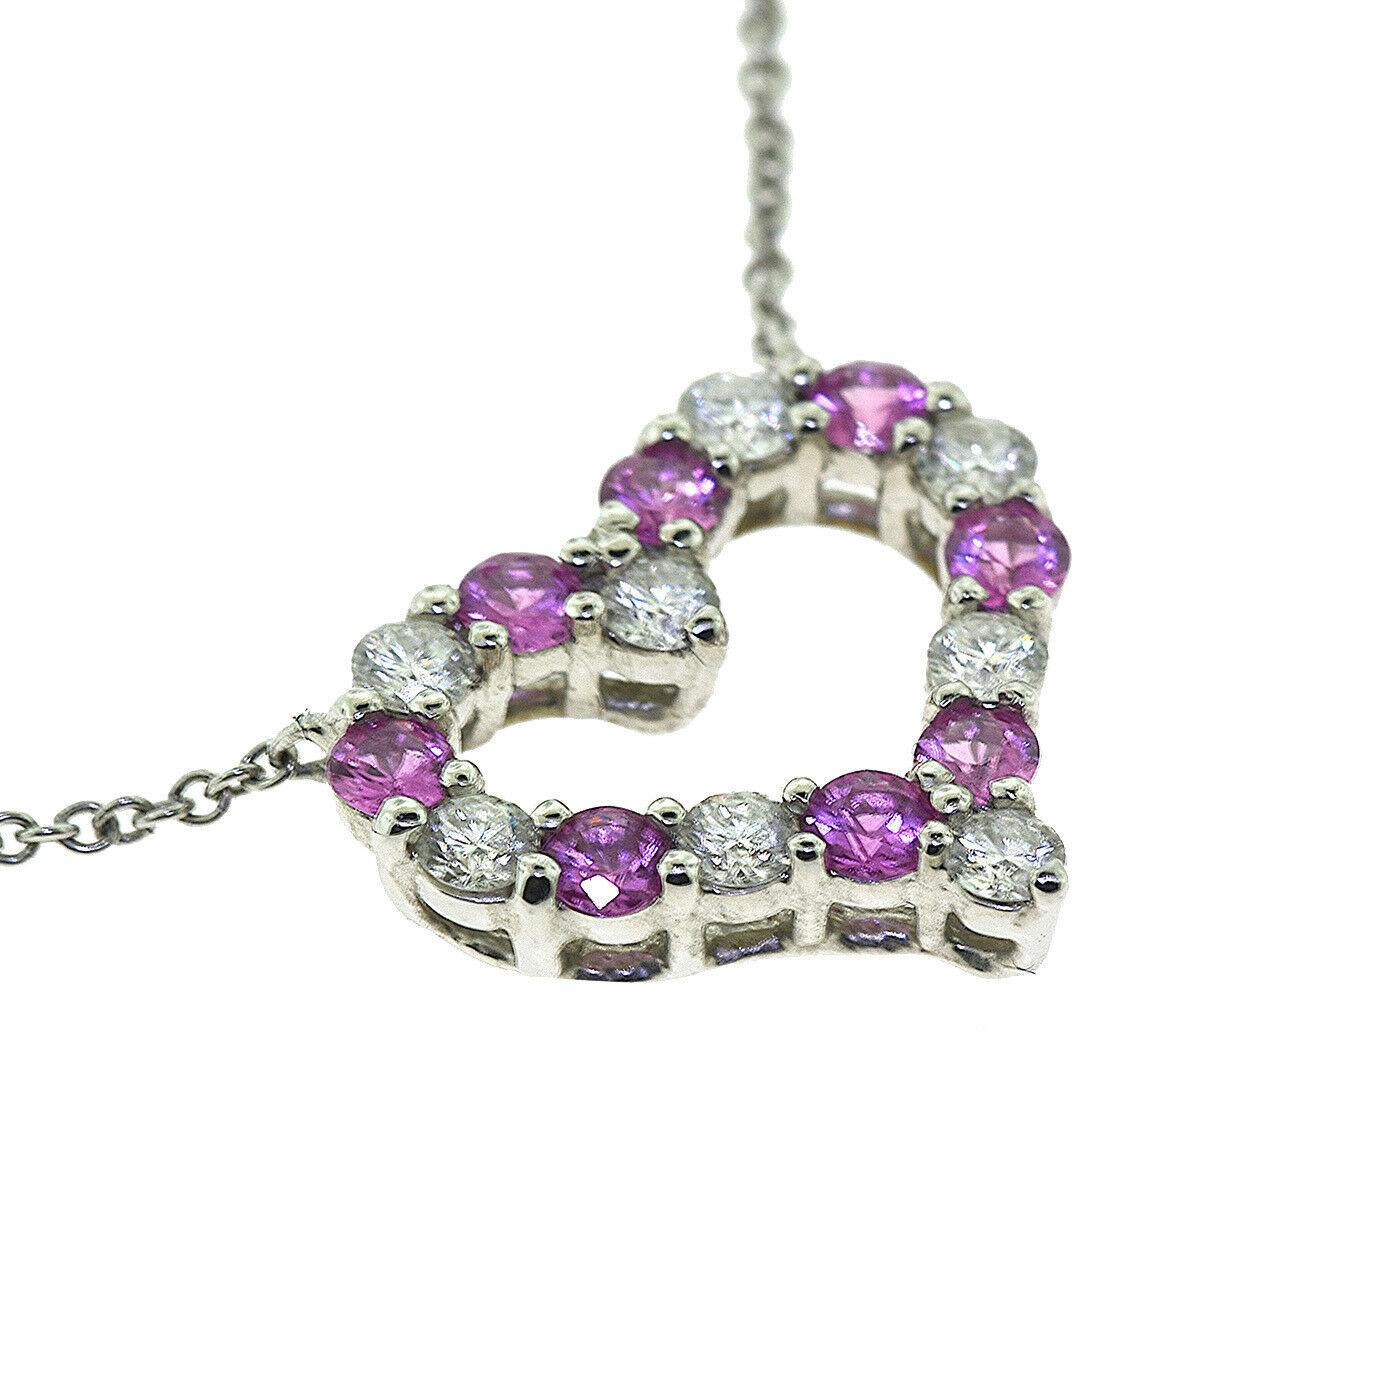 Brilliance Jewels, Miami
Questions? Call Us Anytime!
786,482,8100

Designer: Tiffany & Co.

Style: Heart Pendant Necklace

Metal: Platinum 

Stones: 8 Round Brilliant Diamonds, 8 Pink Sapphires 

Total Carat Weight: 0.31

Round Pink Sapphires Carat